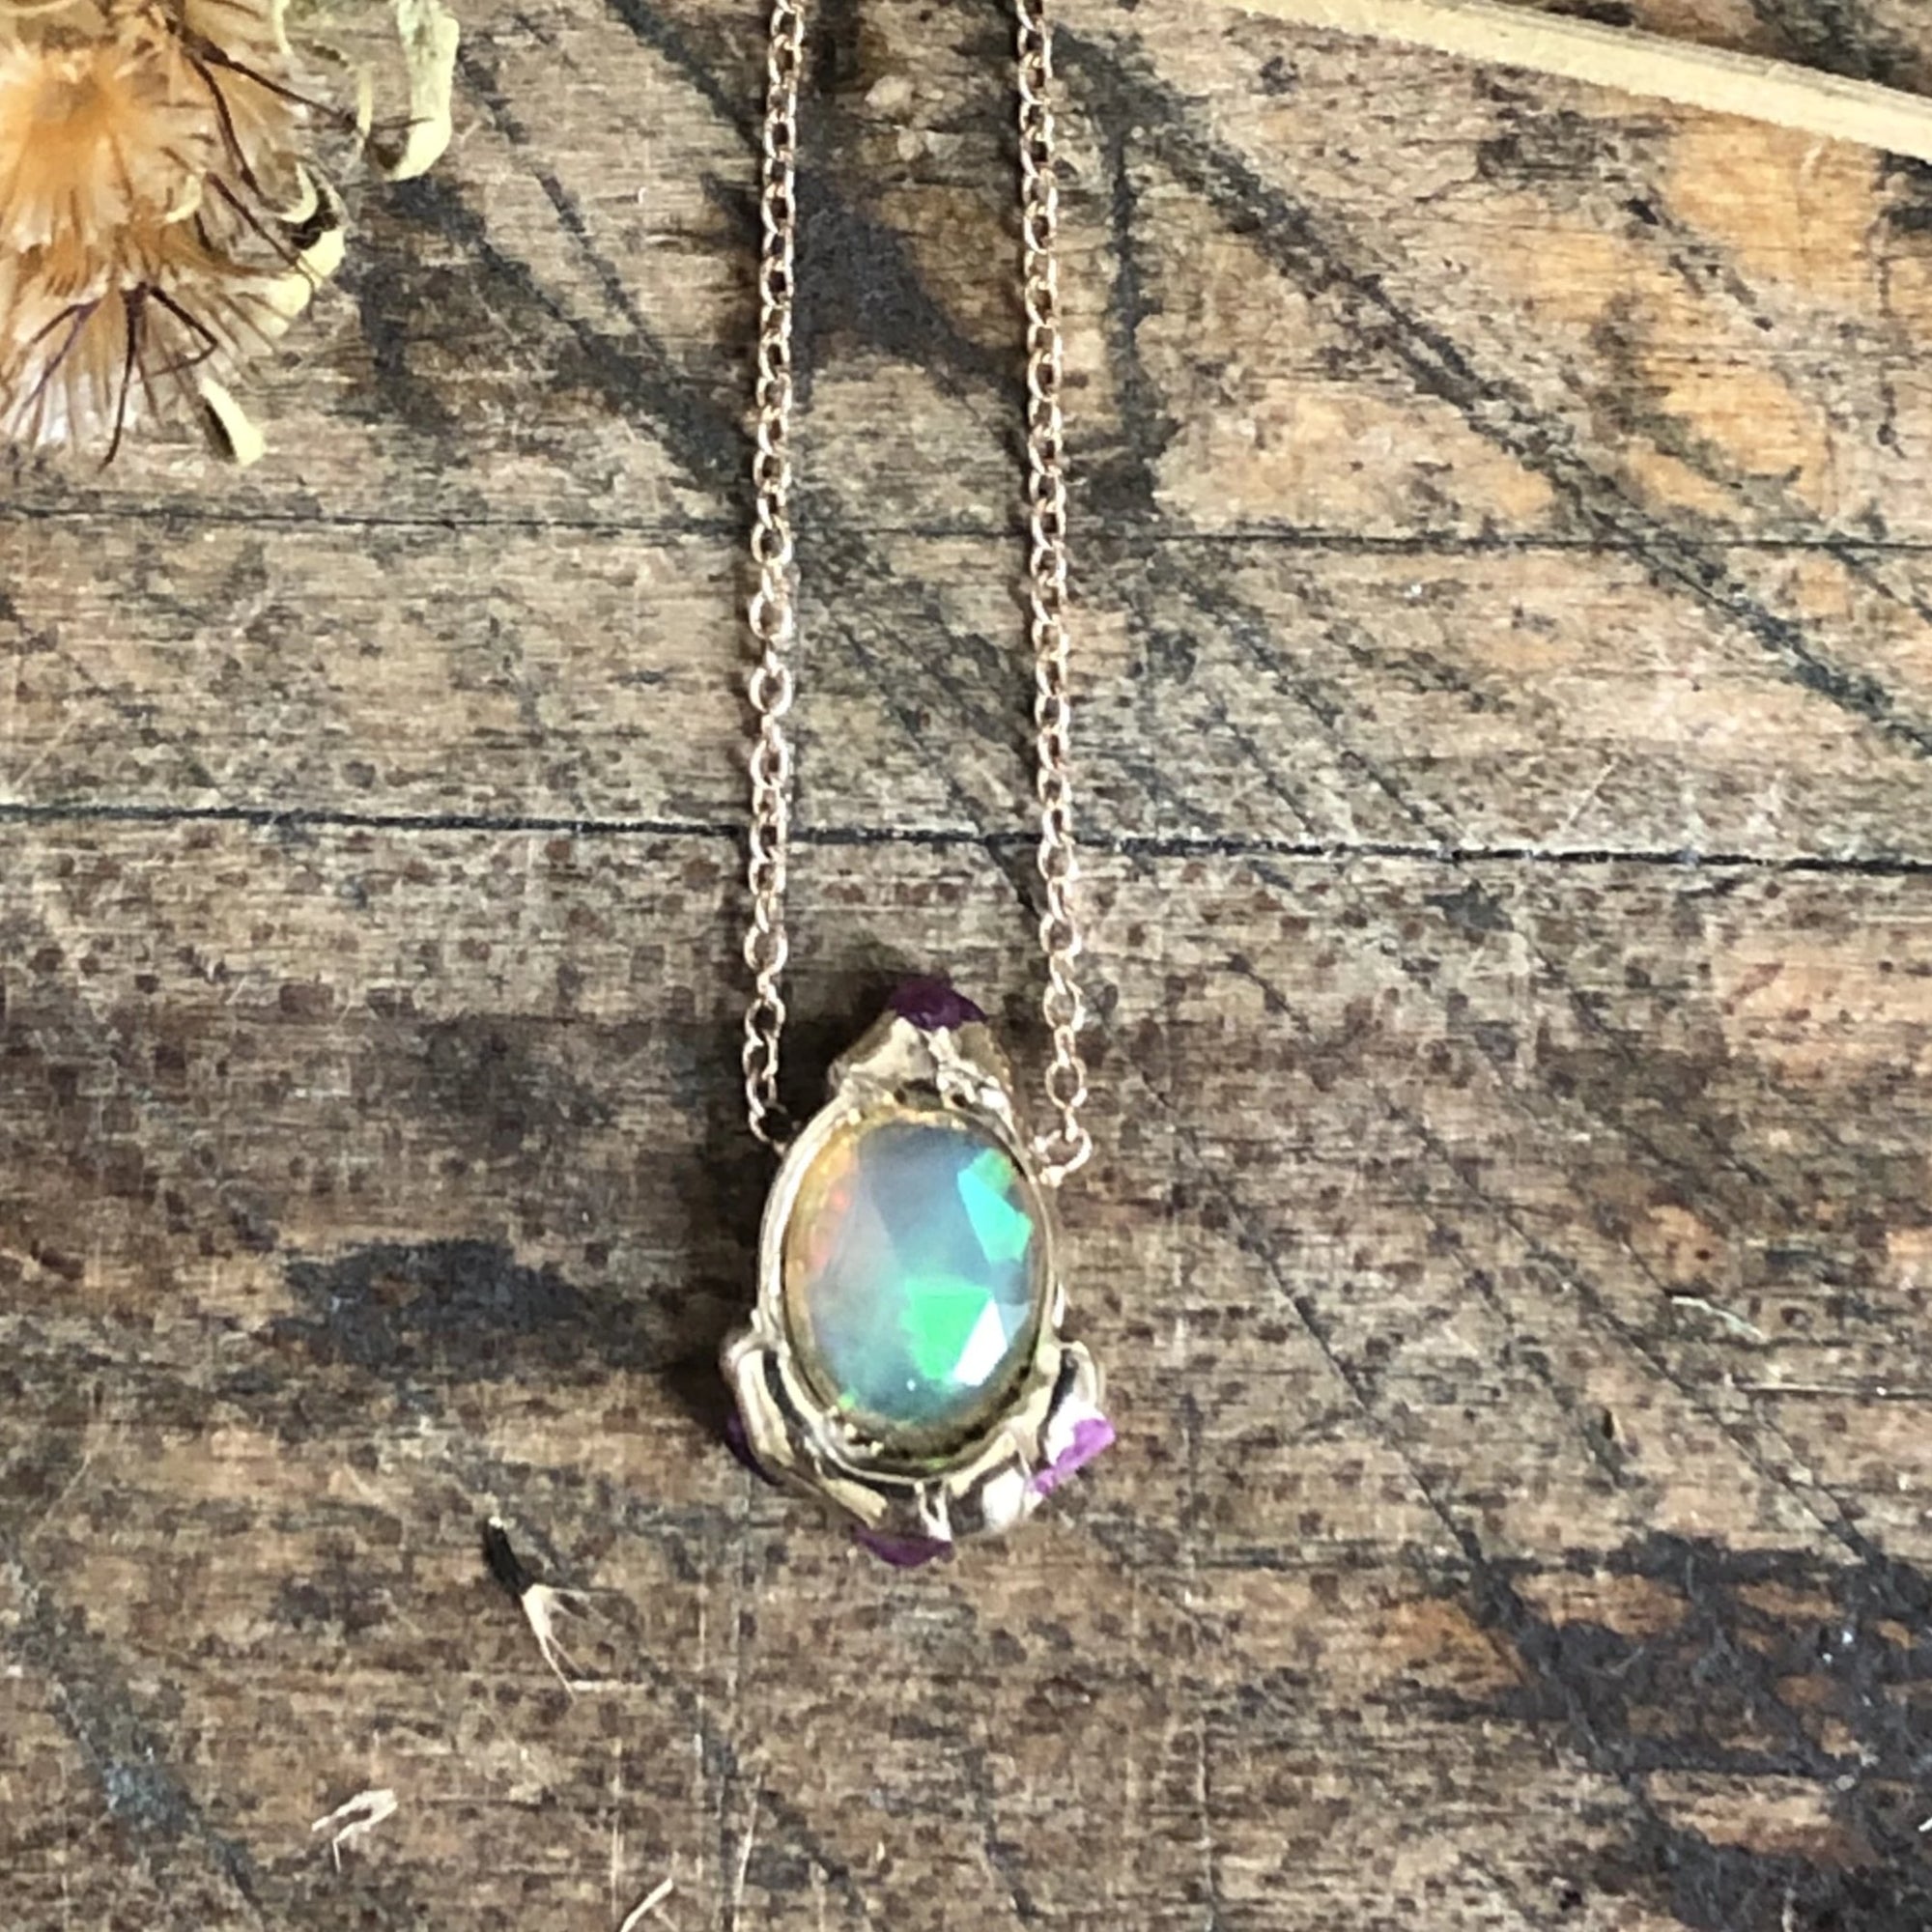 Looking Glass Solo Pendant